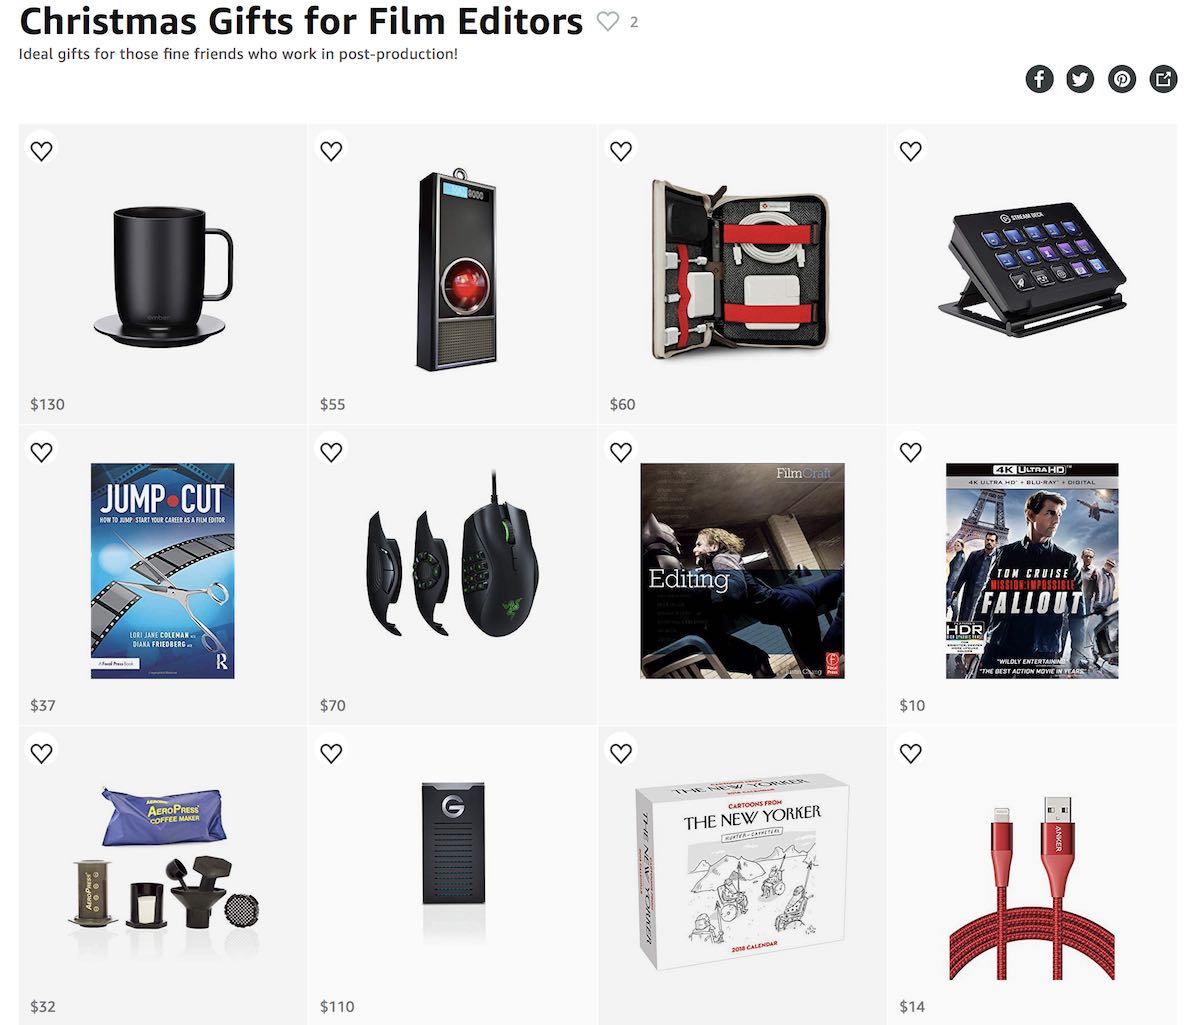 The Best Christmas Gifts for Film Editors